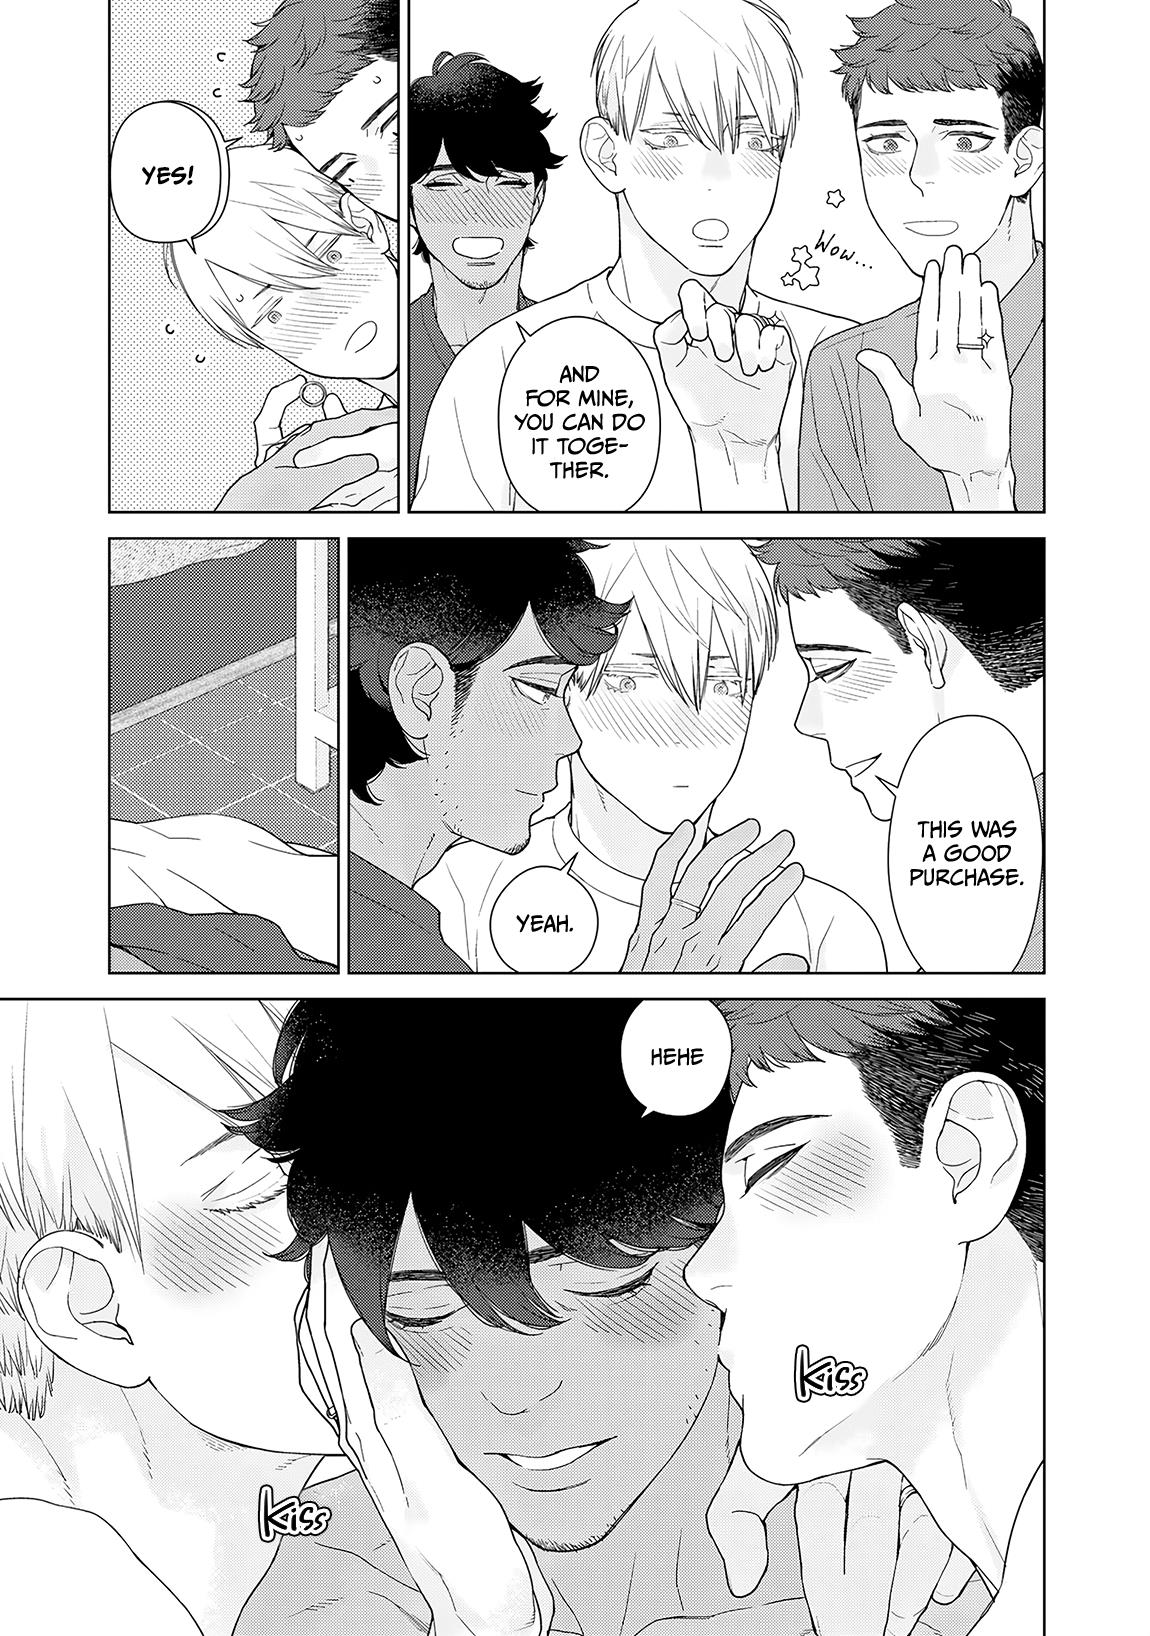 Who Will You Kiss? - Page 4